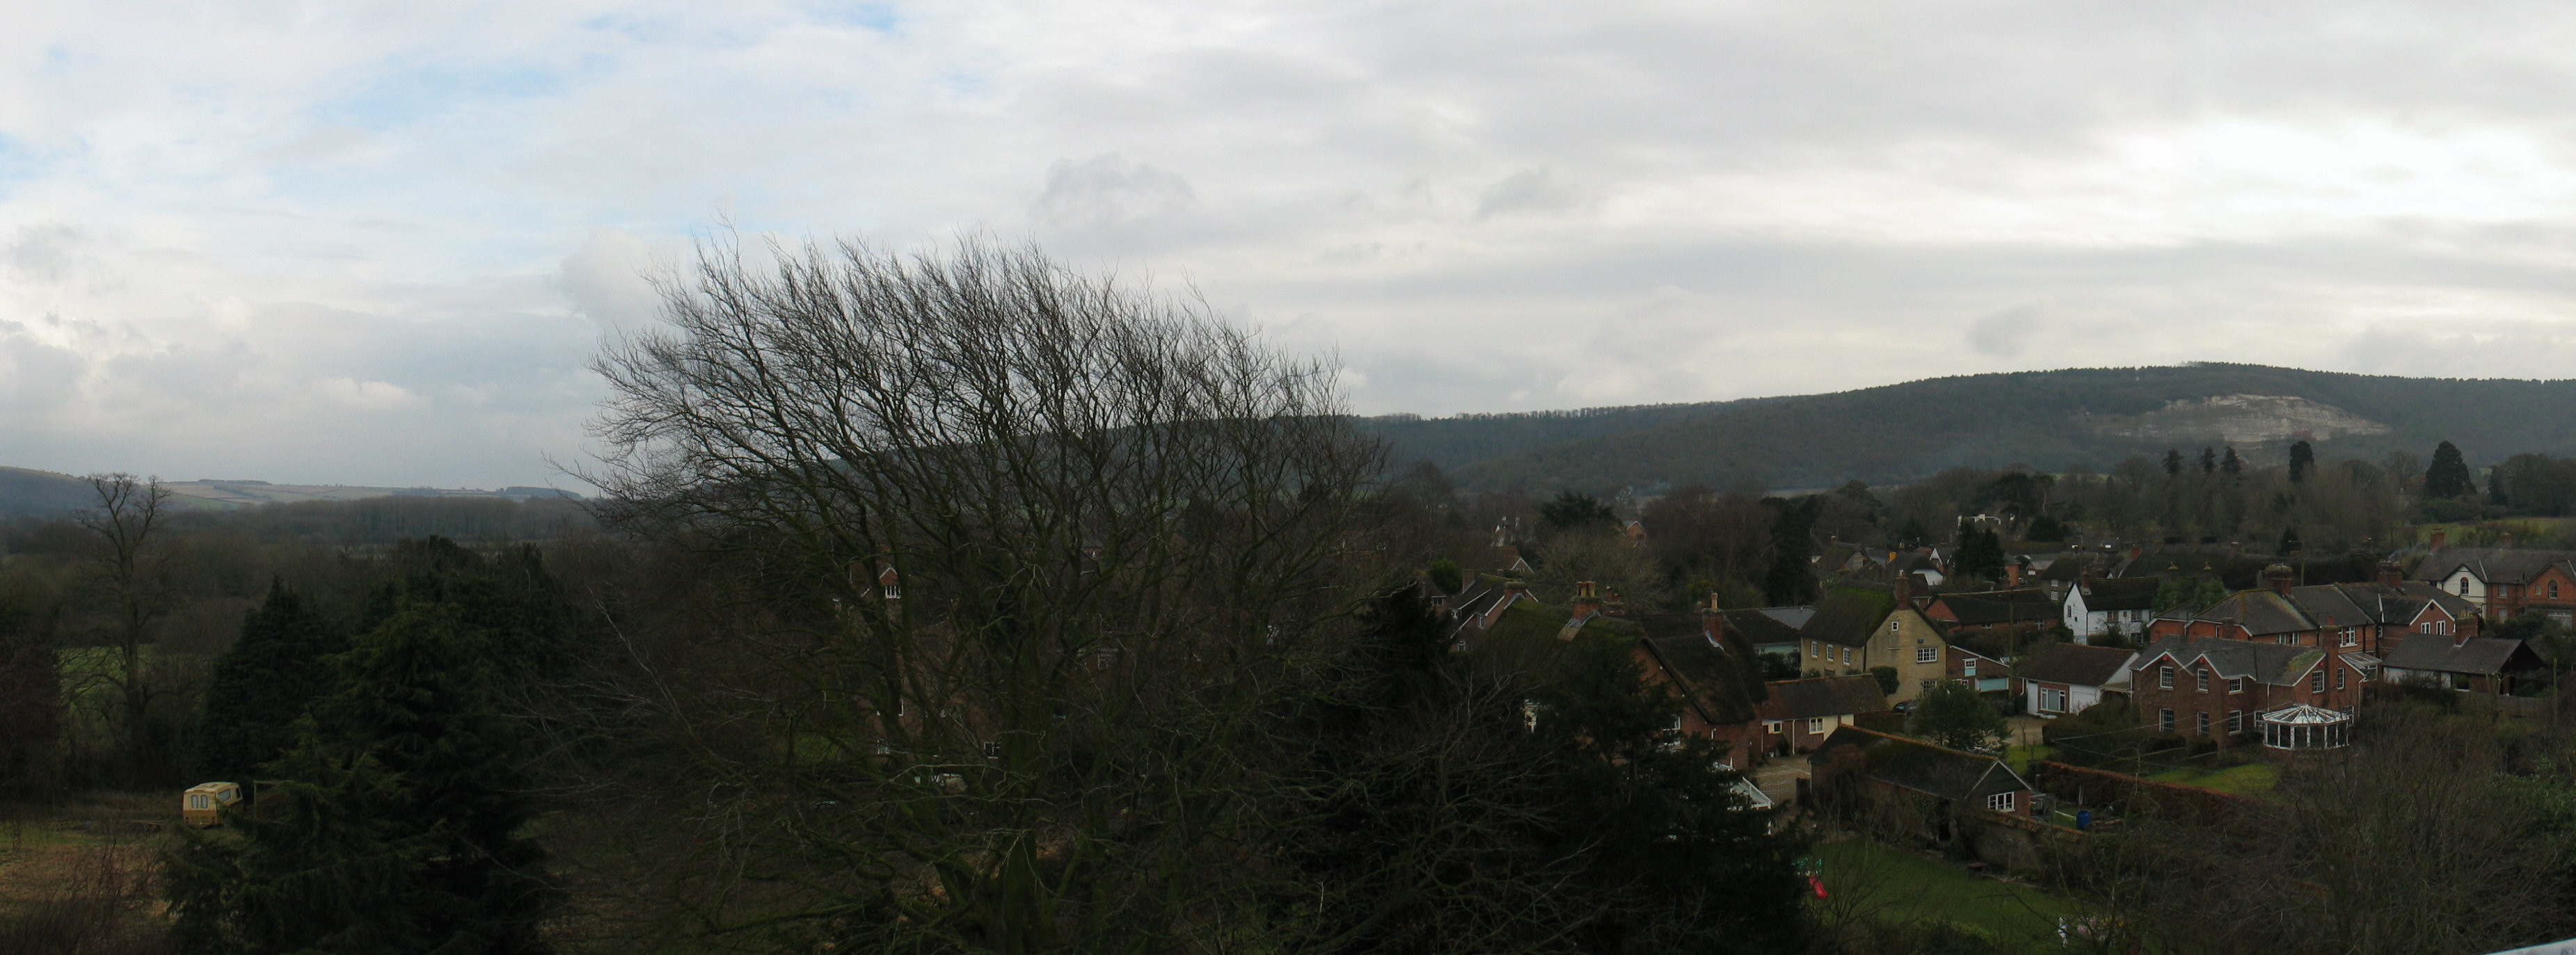 East View from Church Tower